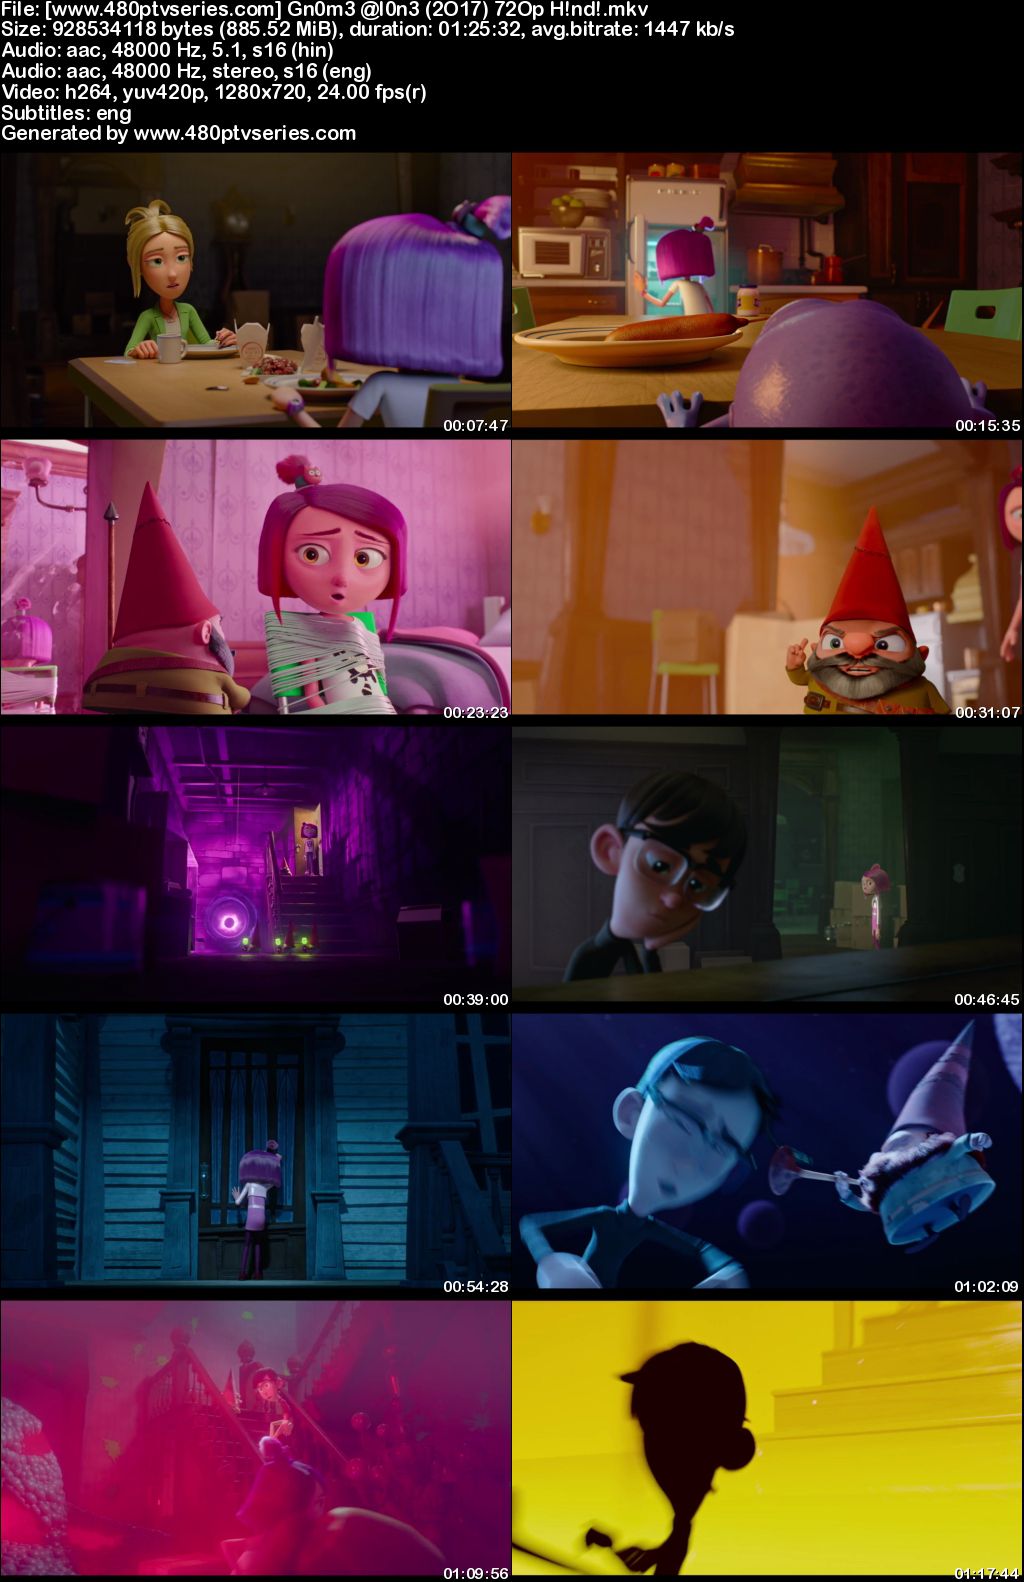 Watch Online Free Gnome Alone (2017) Full Hindi Dual Audio Movie Download 480p 720p Web-DL